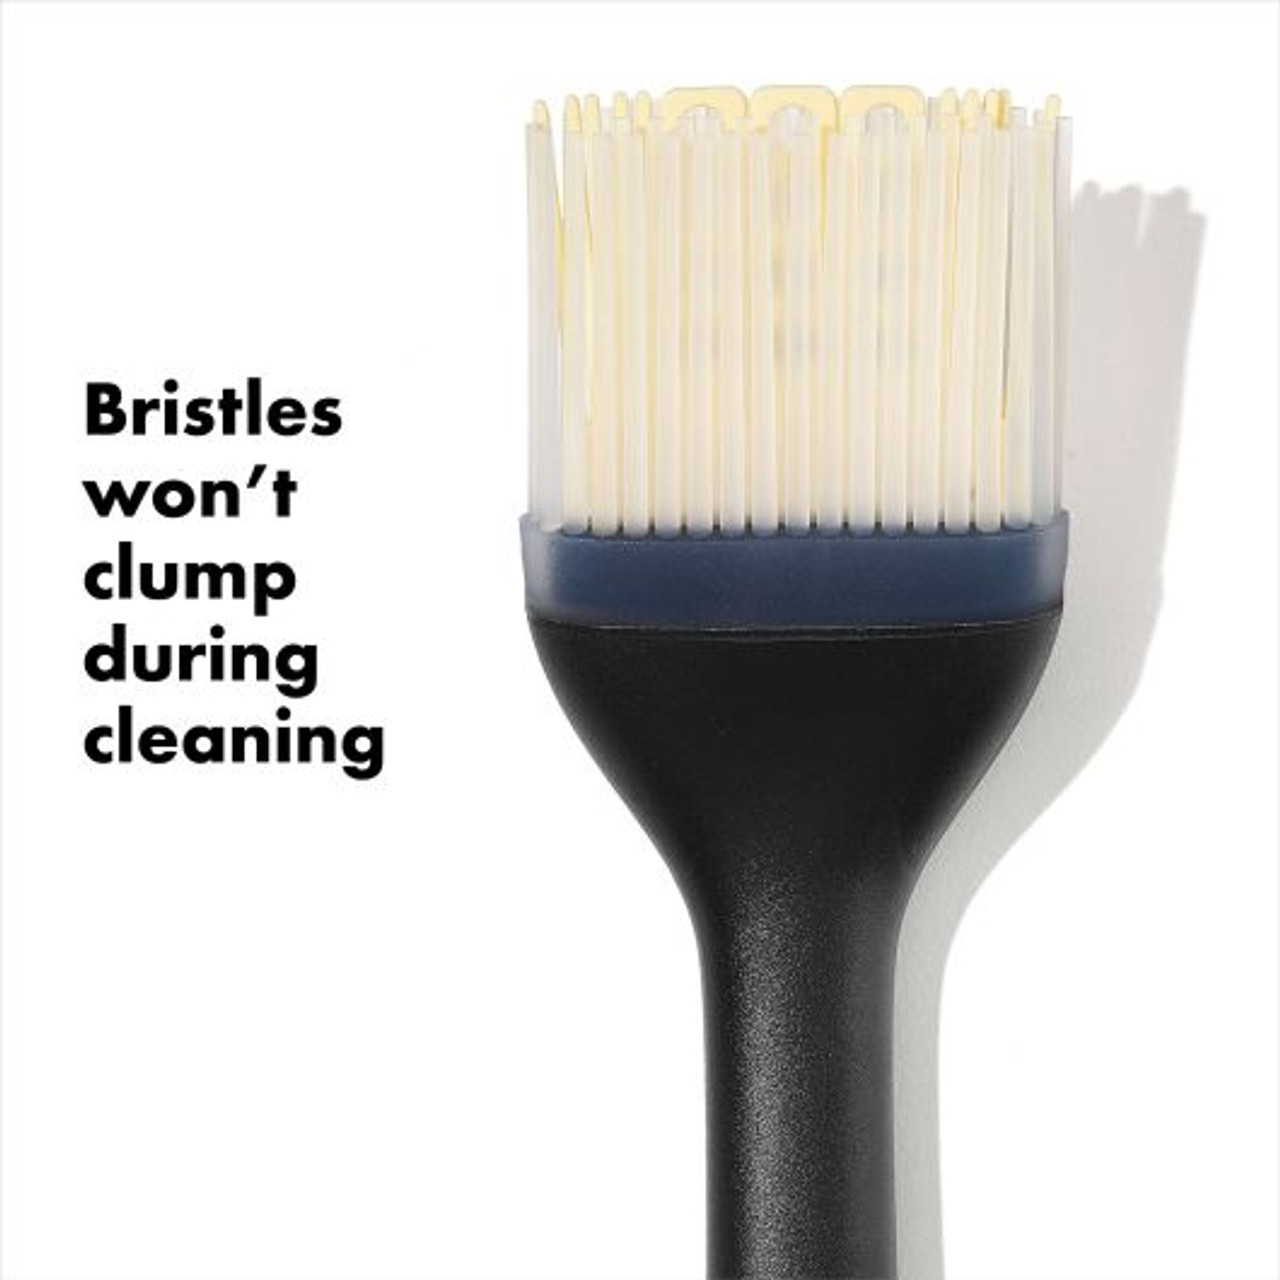 OXO Good Grips Silicone Basting Brush - Fante's Kitchen Shop - Since 1906